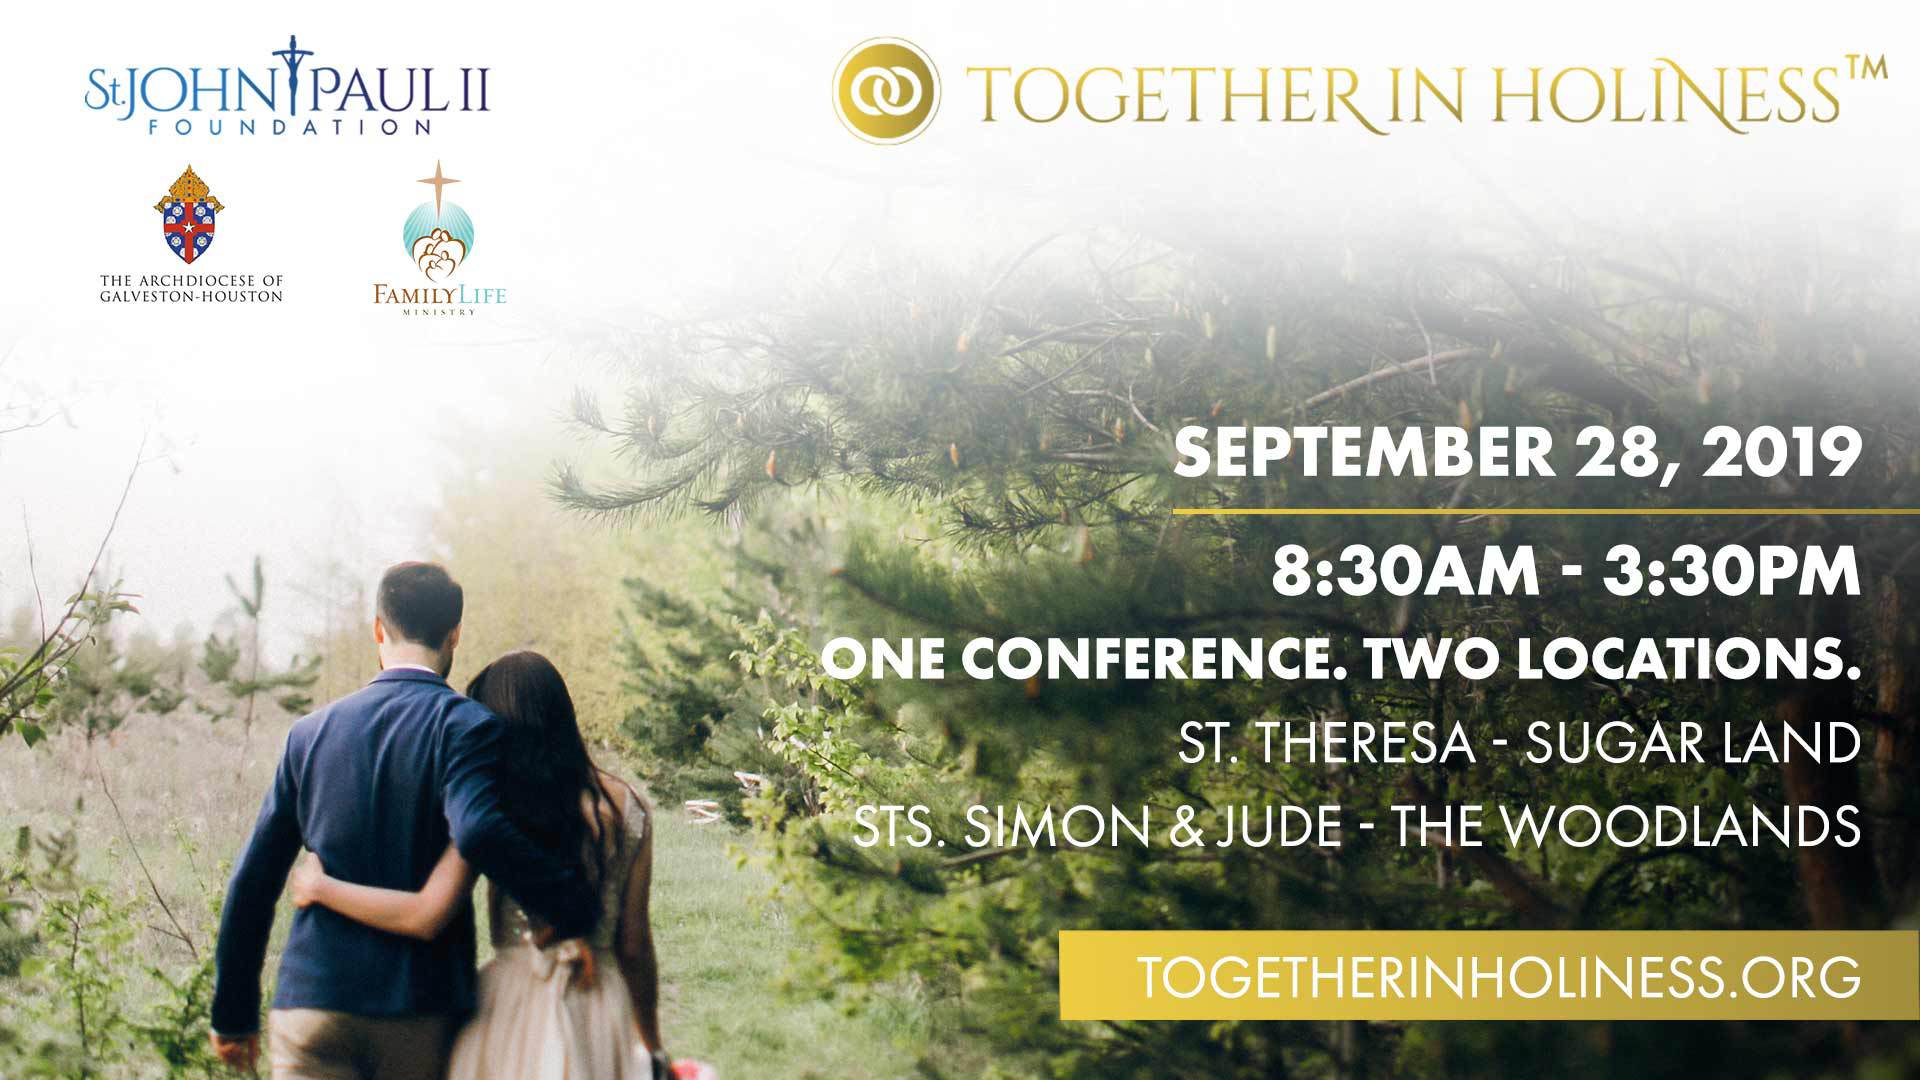 Together in Holiness graphic